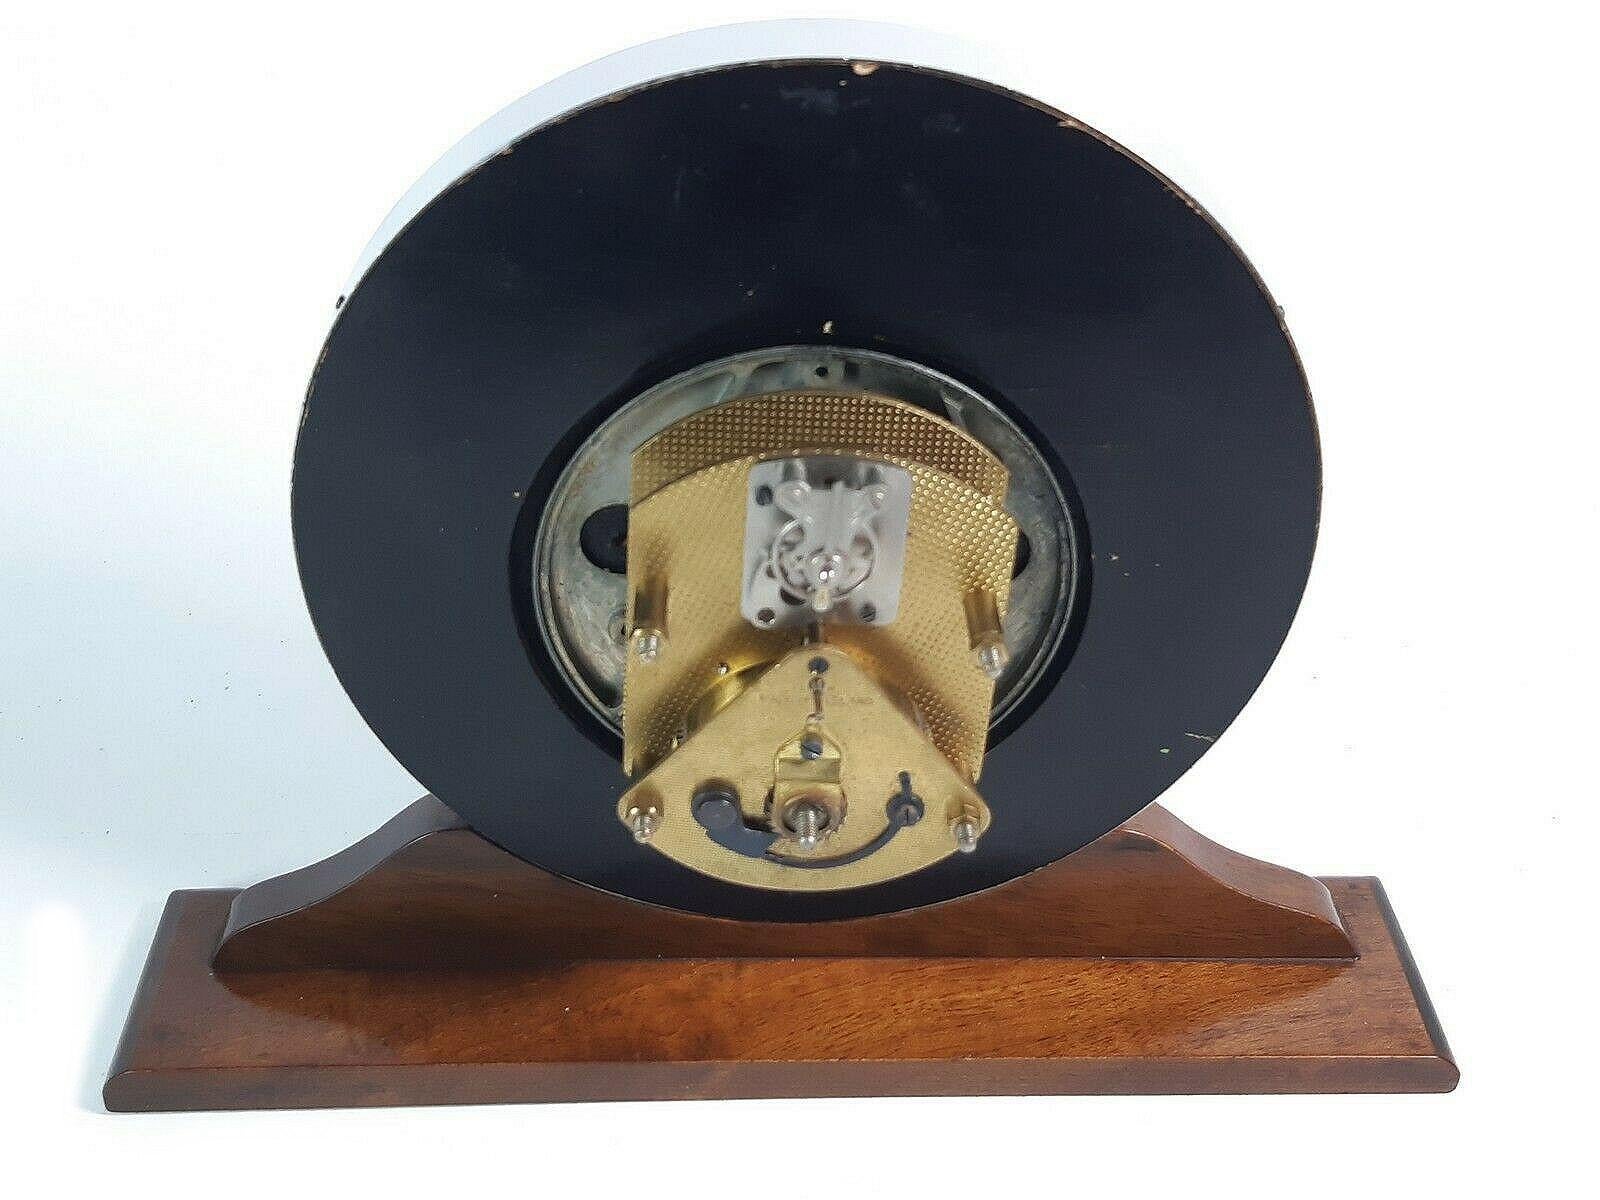 For your consideration is this super stylish Art Deco Wood and Glass Mantle Clock With Working Original Movement, dating to 1938. Round wood case on polished wood base. The domed glass is held in place within a chromed rim. The clockwork movement is